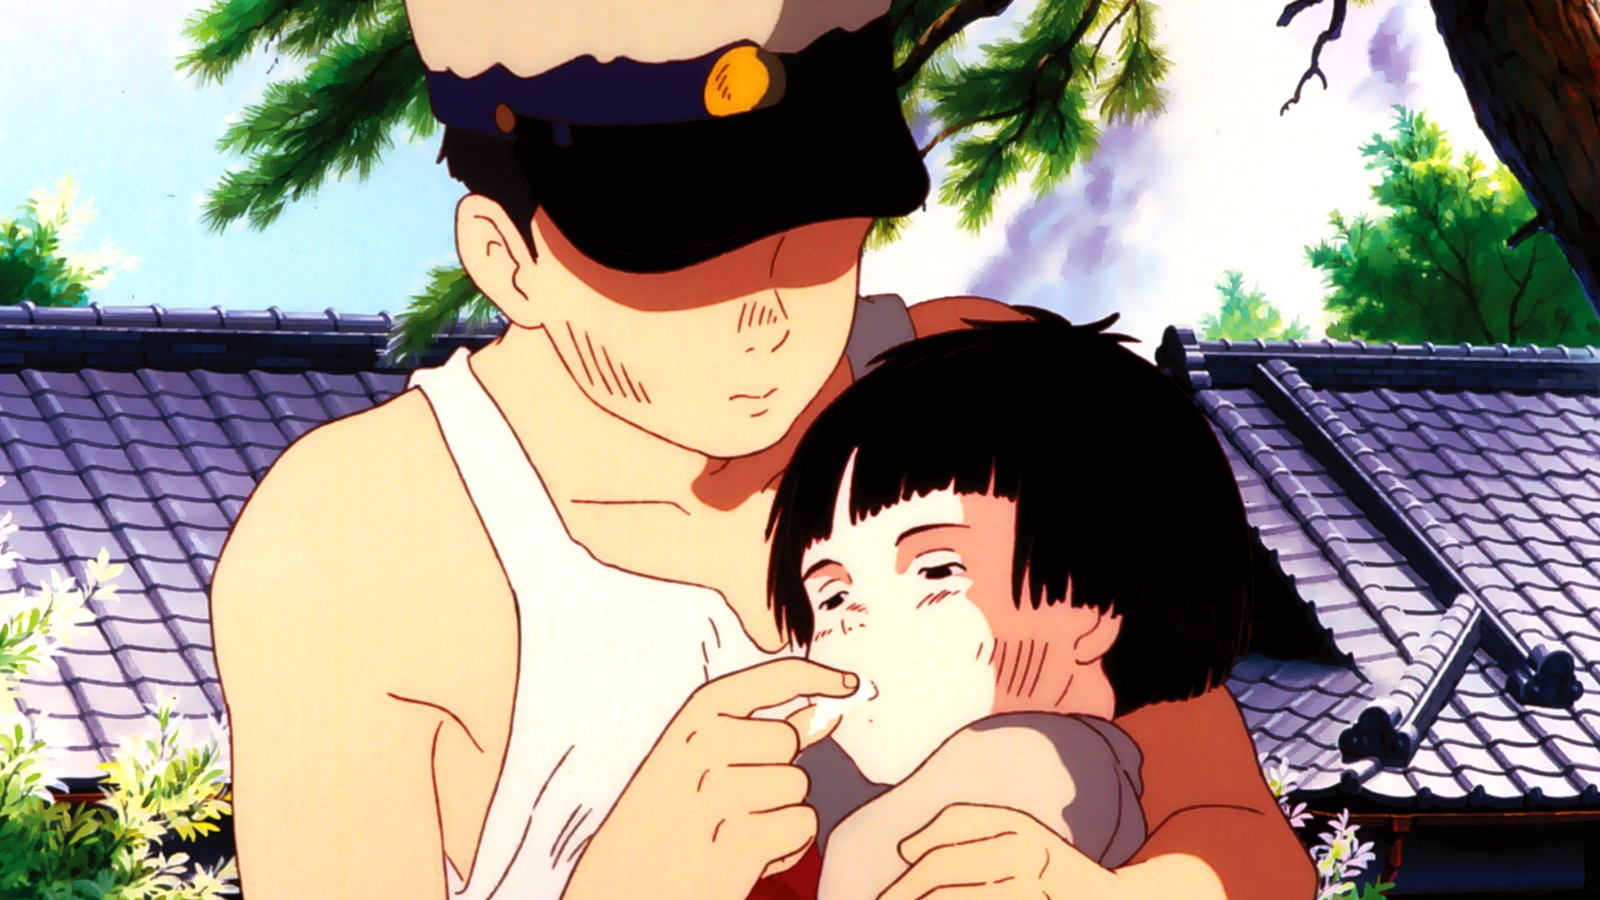 Setsuko and Seita from Grave of the Fireflies